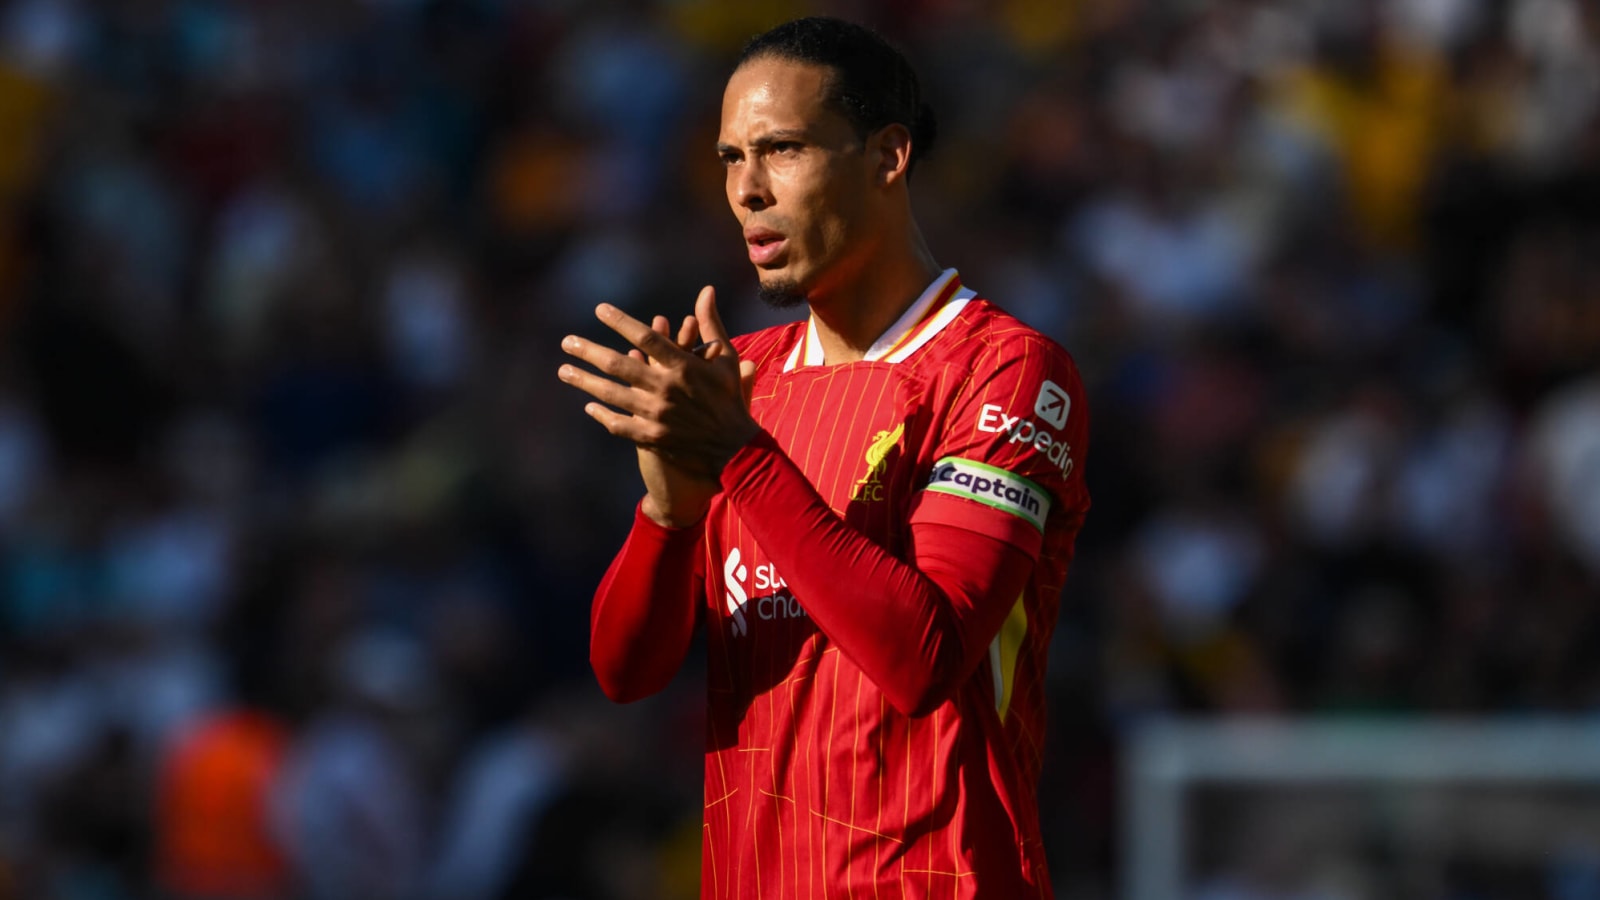 ‘At the moment…’ – Virgil van Dijk drops post-season update on Liverpool contract situation